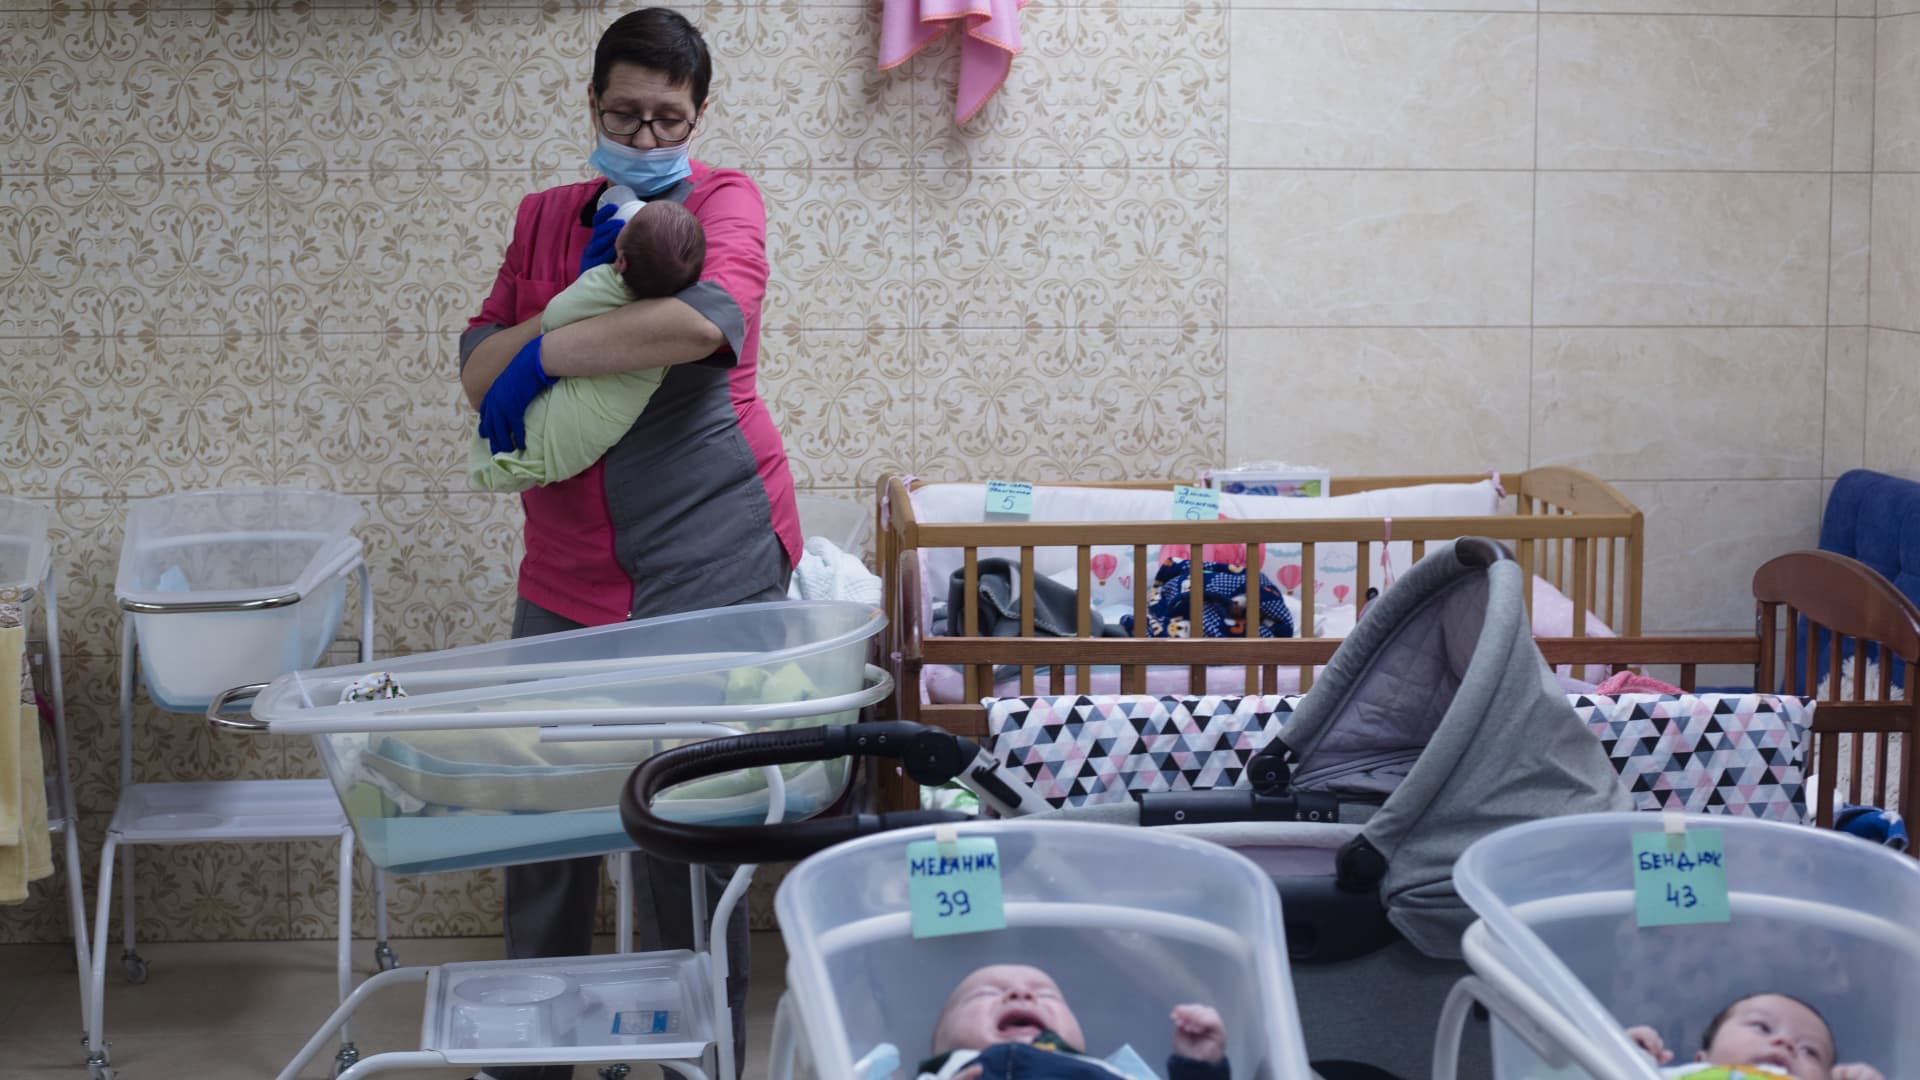 A woman cares for a surrogate-born baby in a makeshift basement shelter in Kyiv, Ukraine following after Russia's invasion.